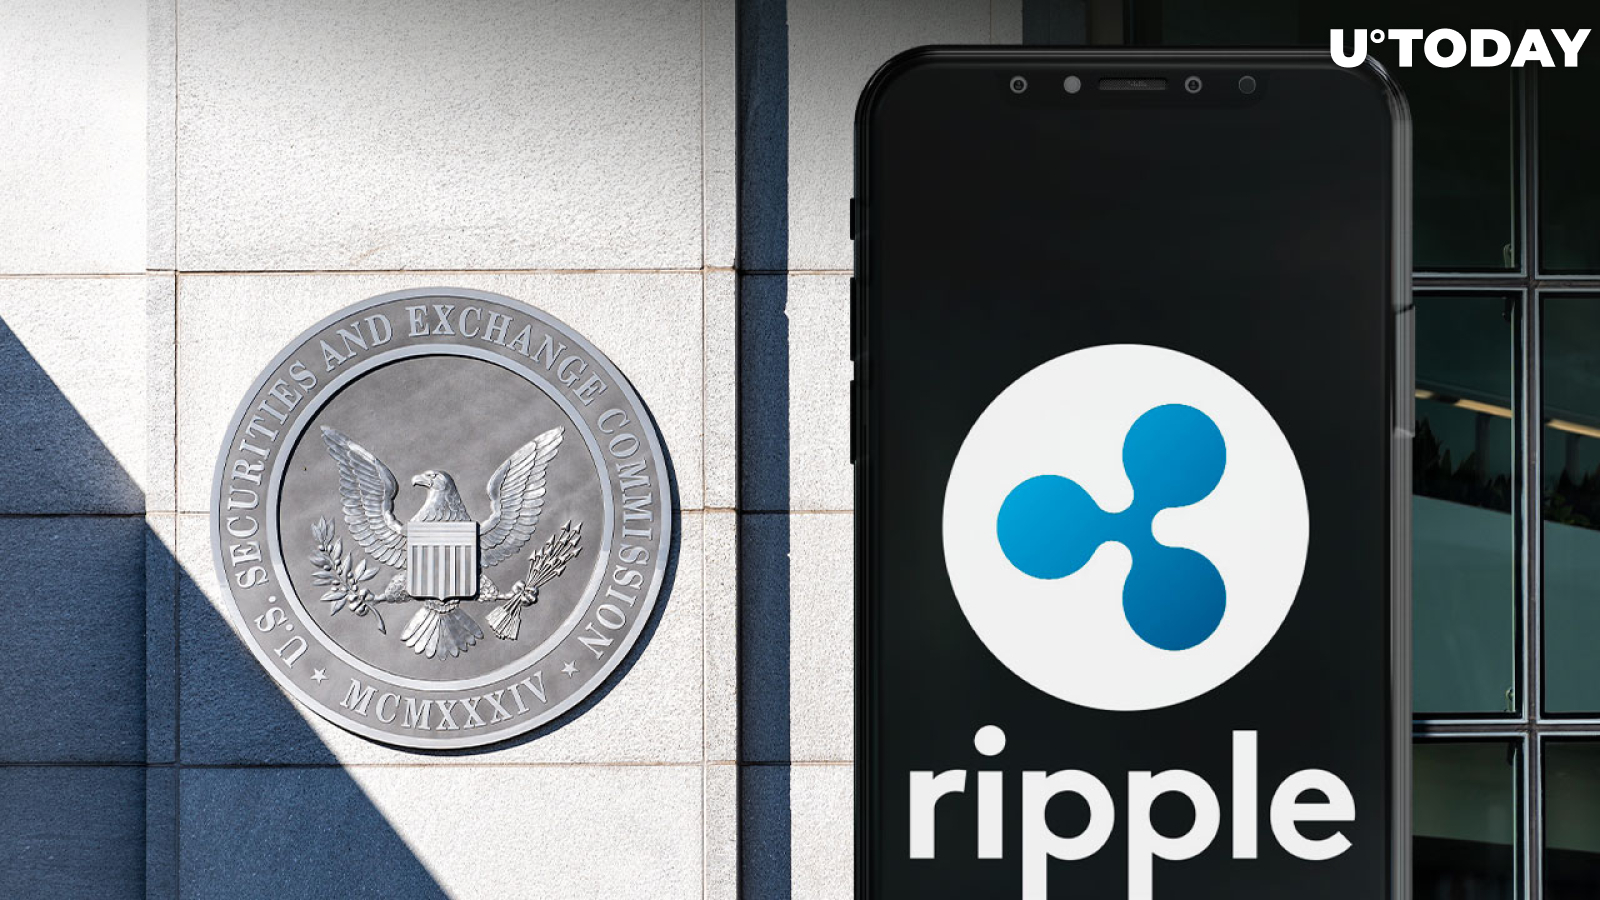 SEC Resists Surrendering Hinman Emails to Ripple